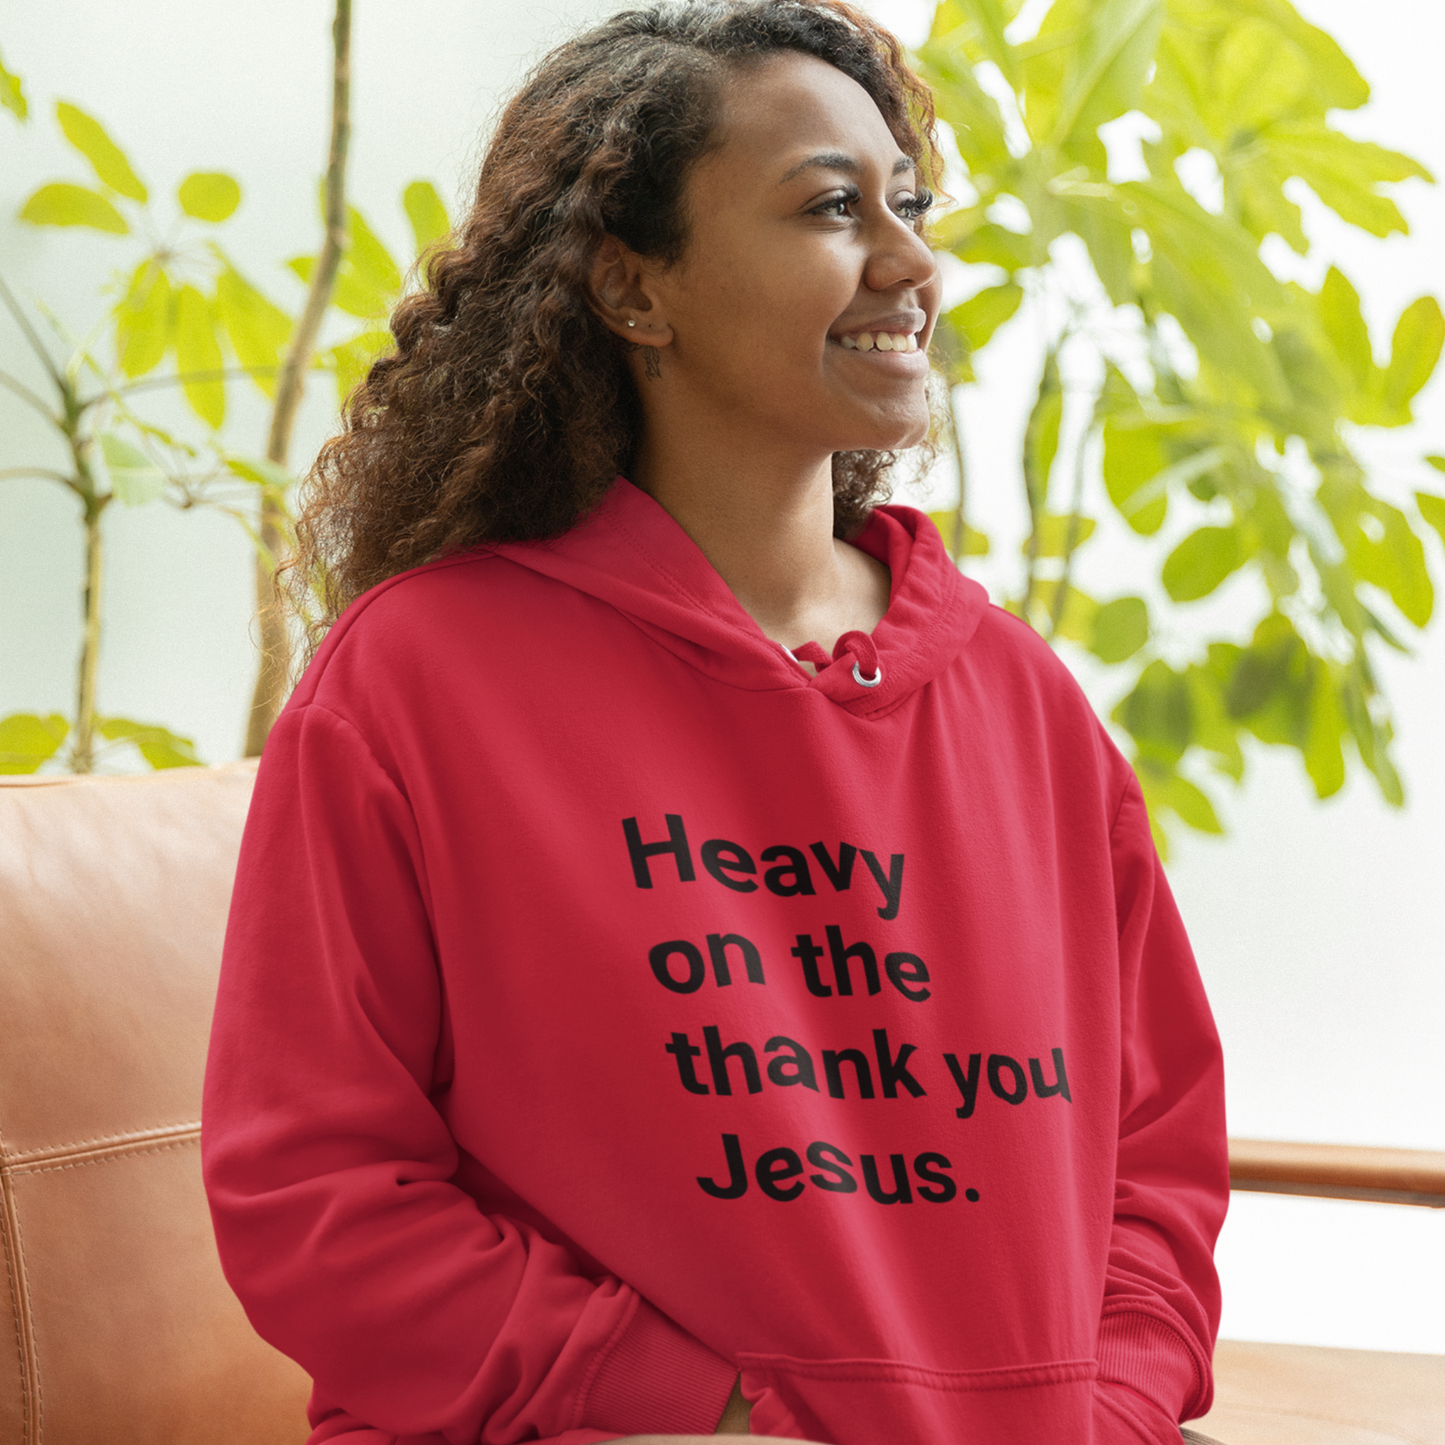 Heavy on the Thank you Jesus (Graphic Black Text) Unisex Heavy Blend Hoodie - Style: Gildan 18500